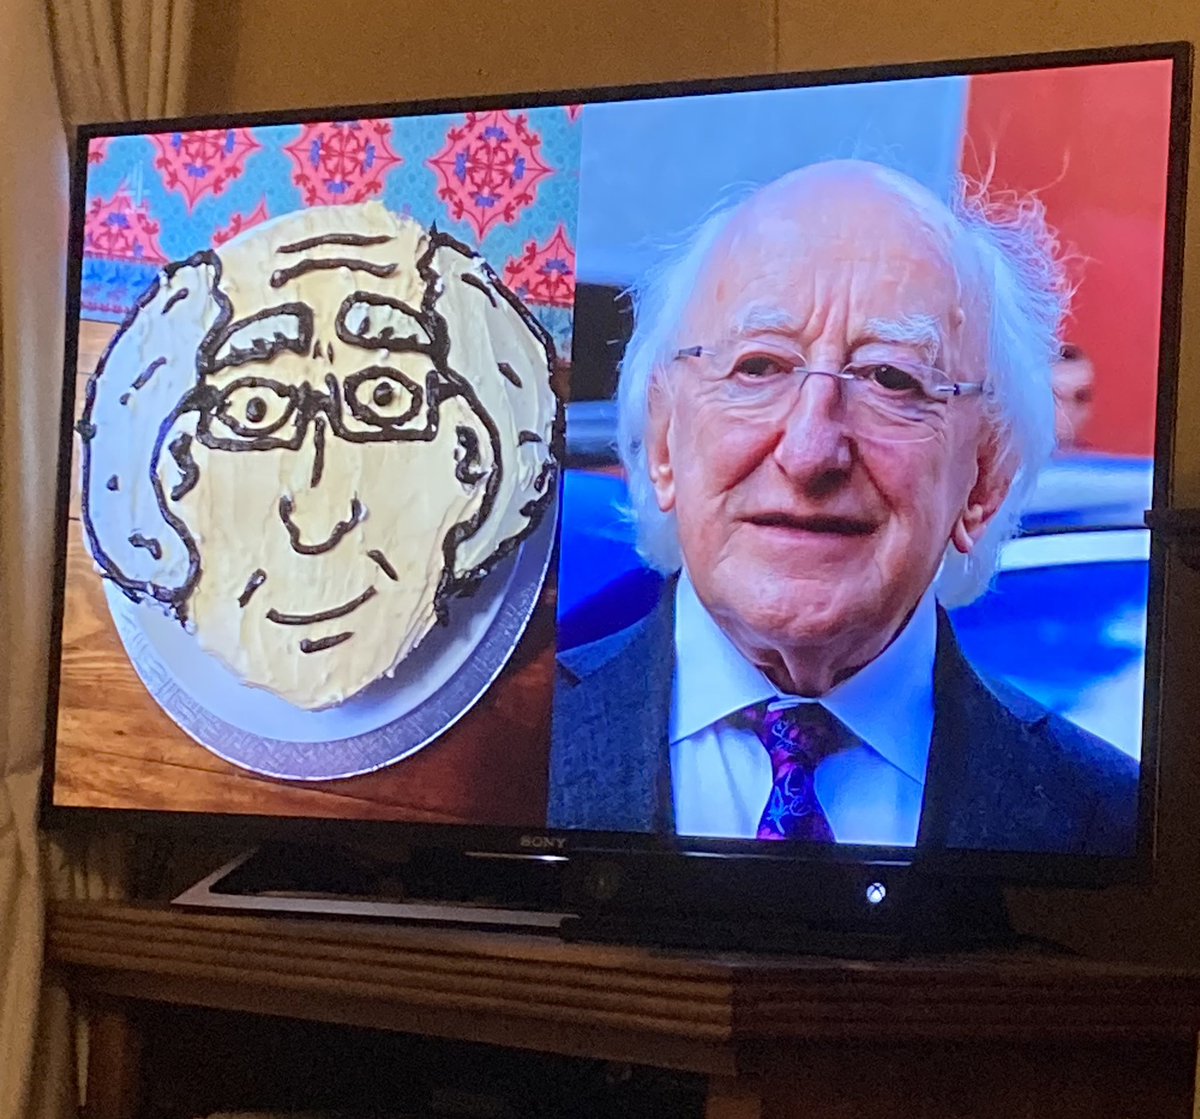 V cute Michael D cake by Lola fm Co. Meath on #BakeOff #ExtraSlice this evening #GBBO